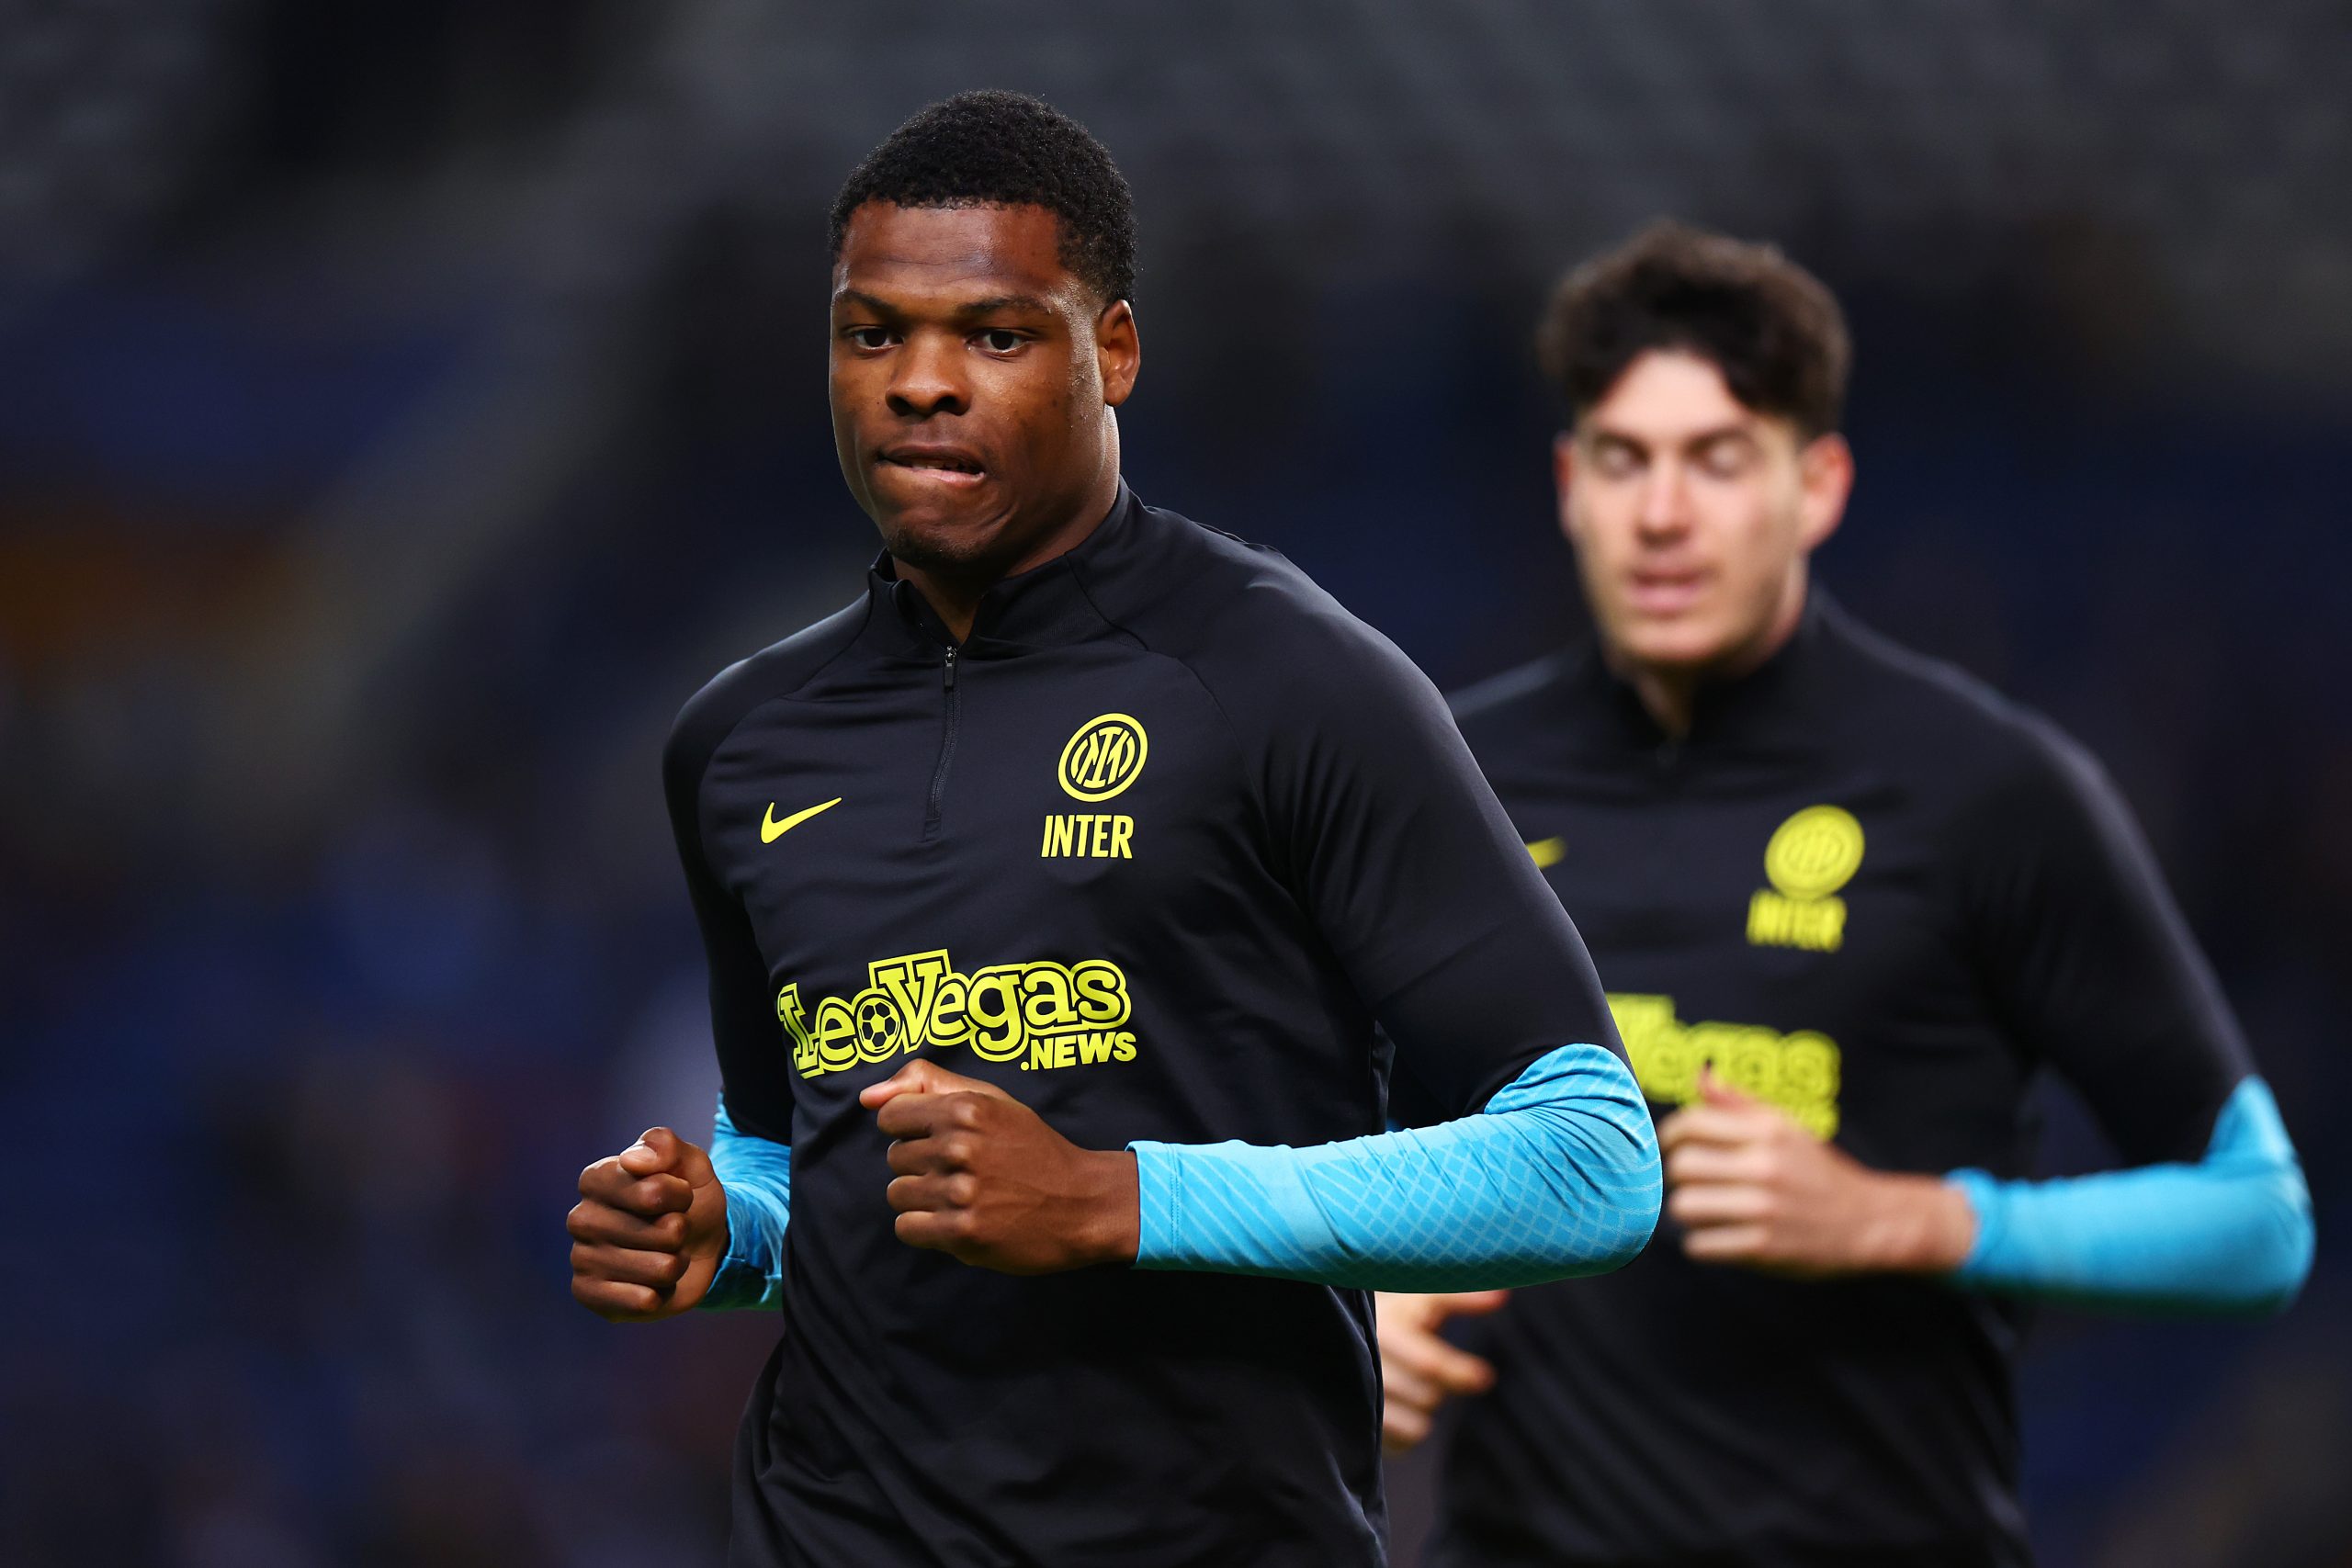 Manchester United 'could try to sign' Inter Milan full-back Denzel Dumfries next summer.